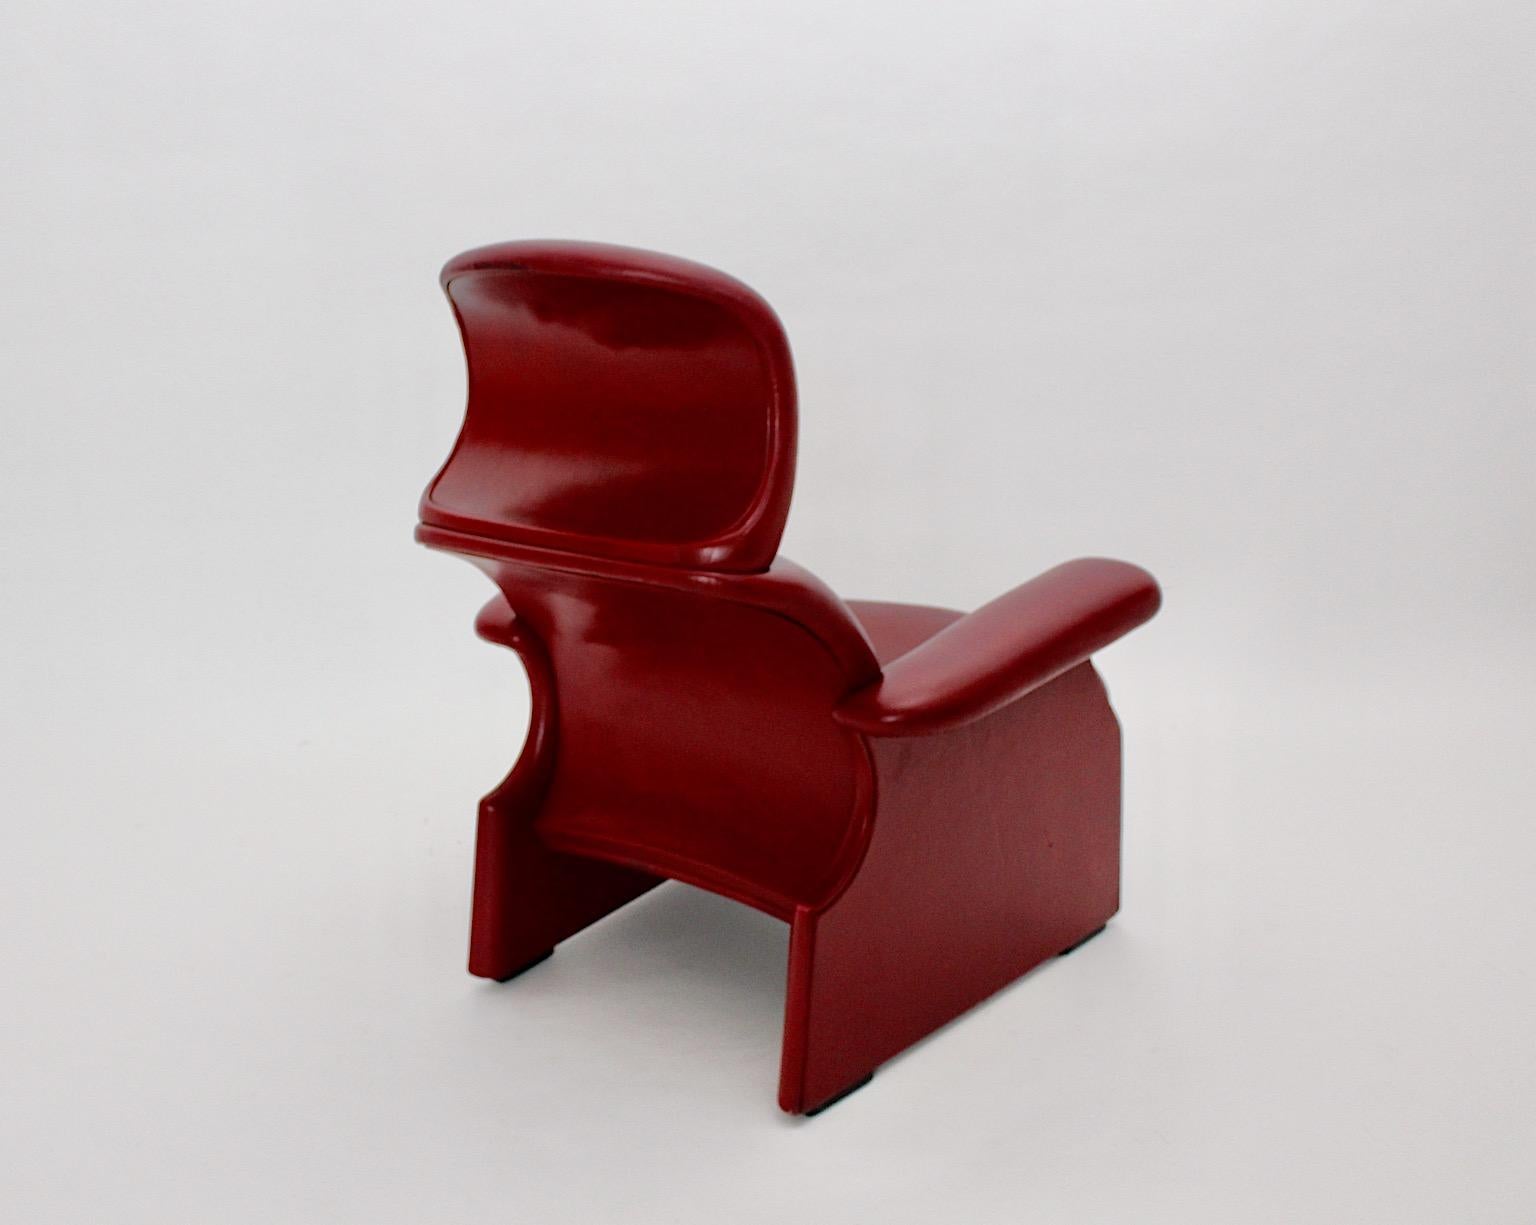 20th Century Organic Vintage Sculptural Red Lounge Chair by Achille & Piero Castiglioni 1960s For Sale